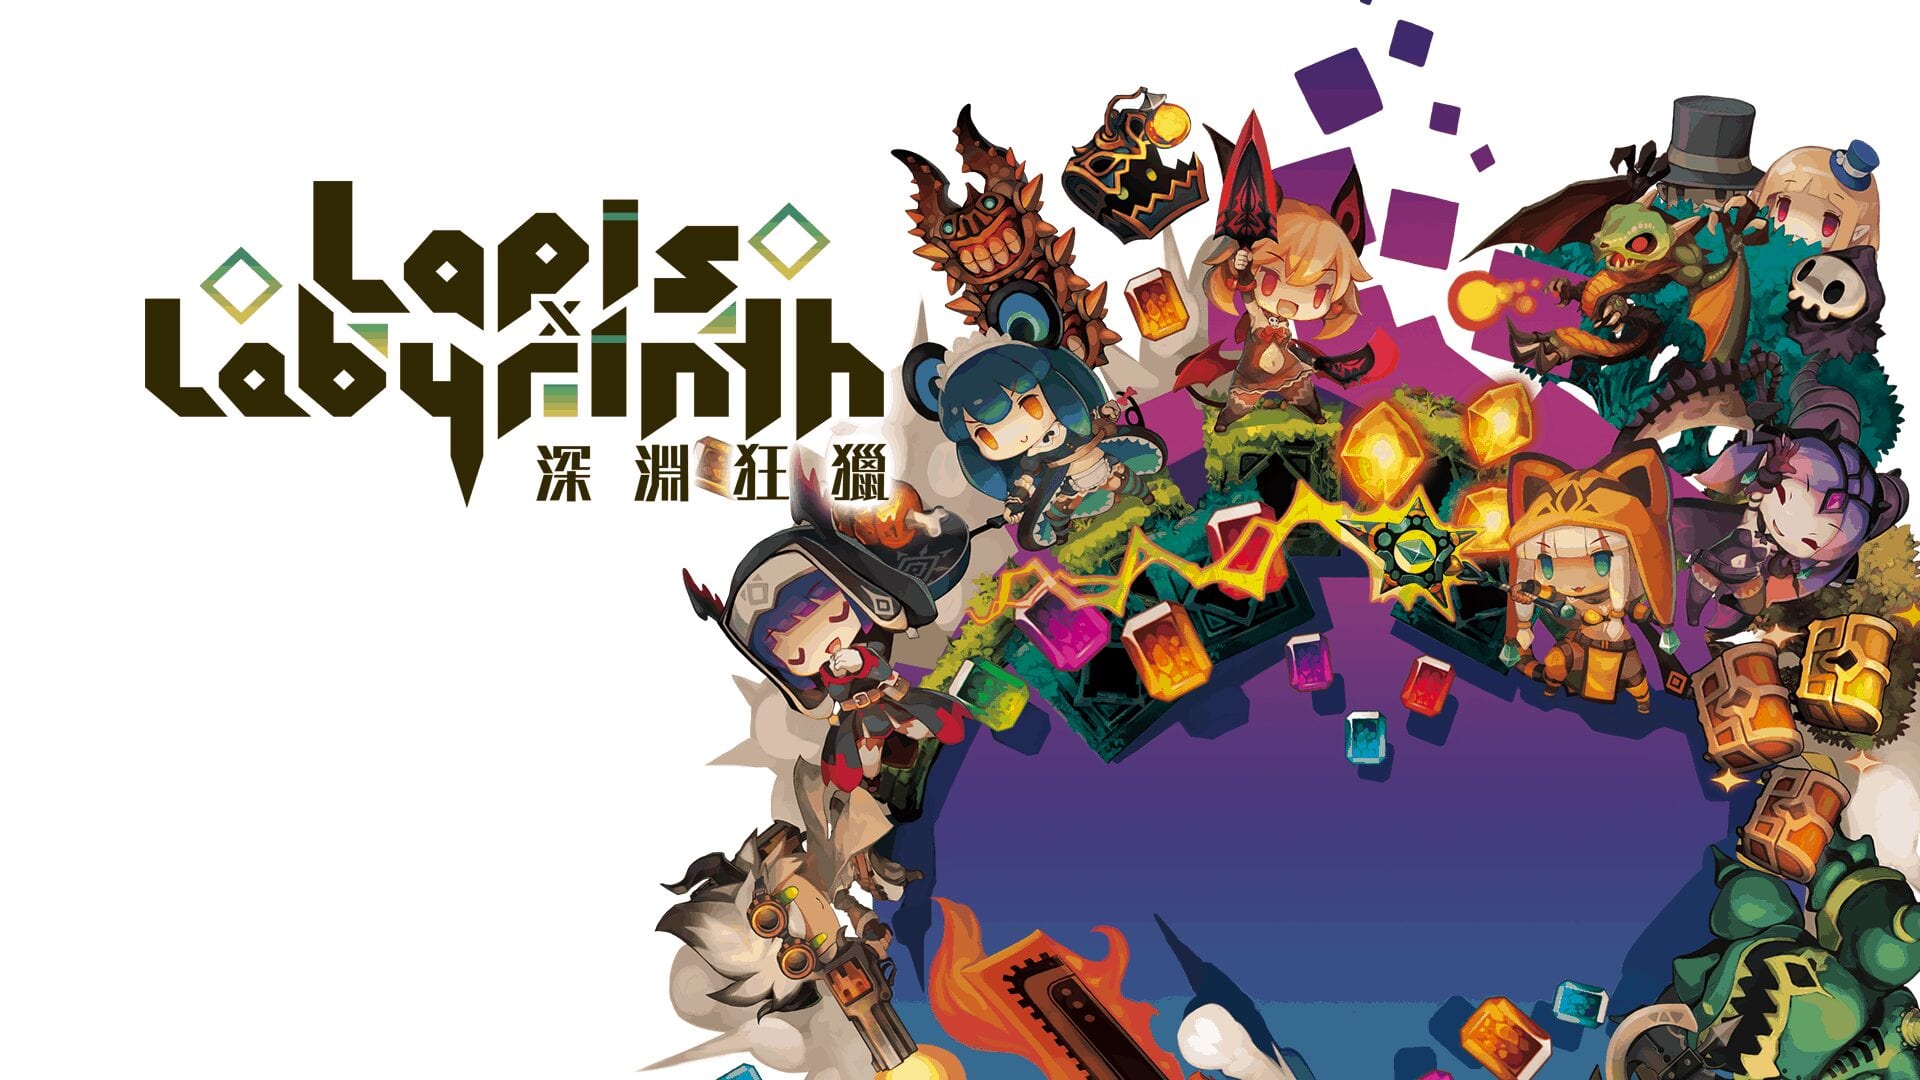 Be An Adventurer In Lapis X Labyrinth, Coming To Playstation 4 And Nintendo Switch On 7th June 2019